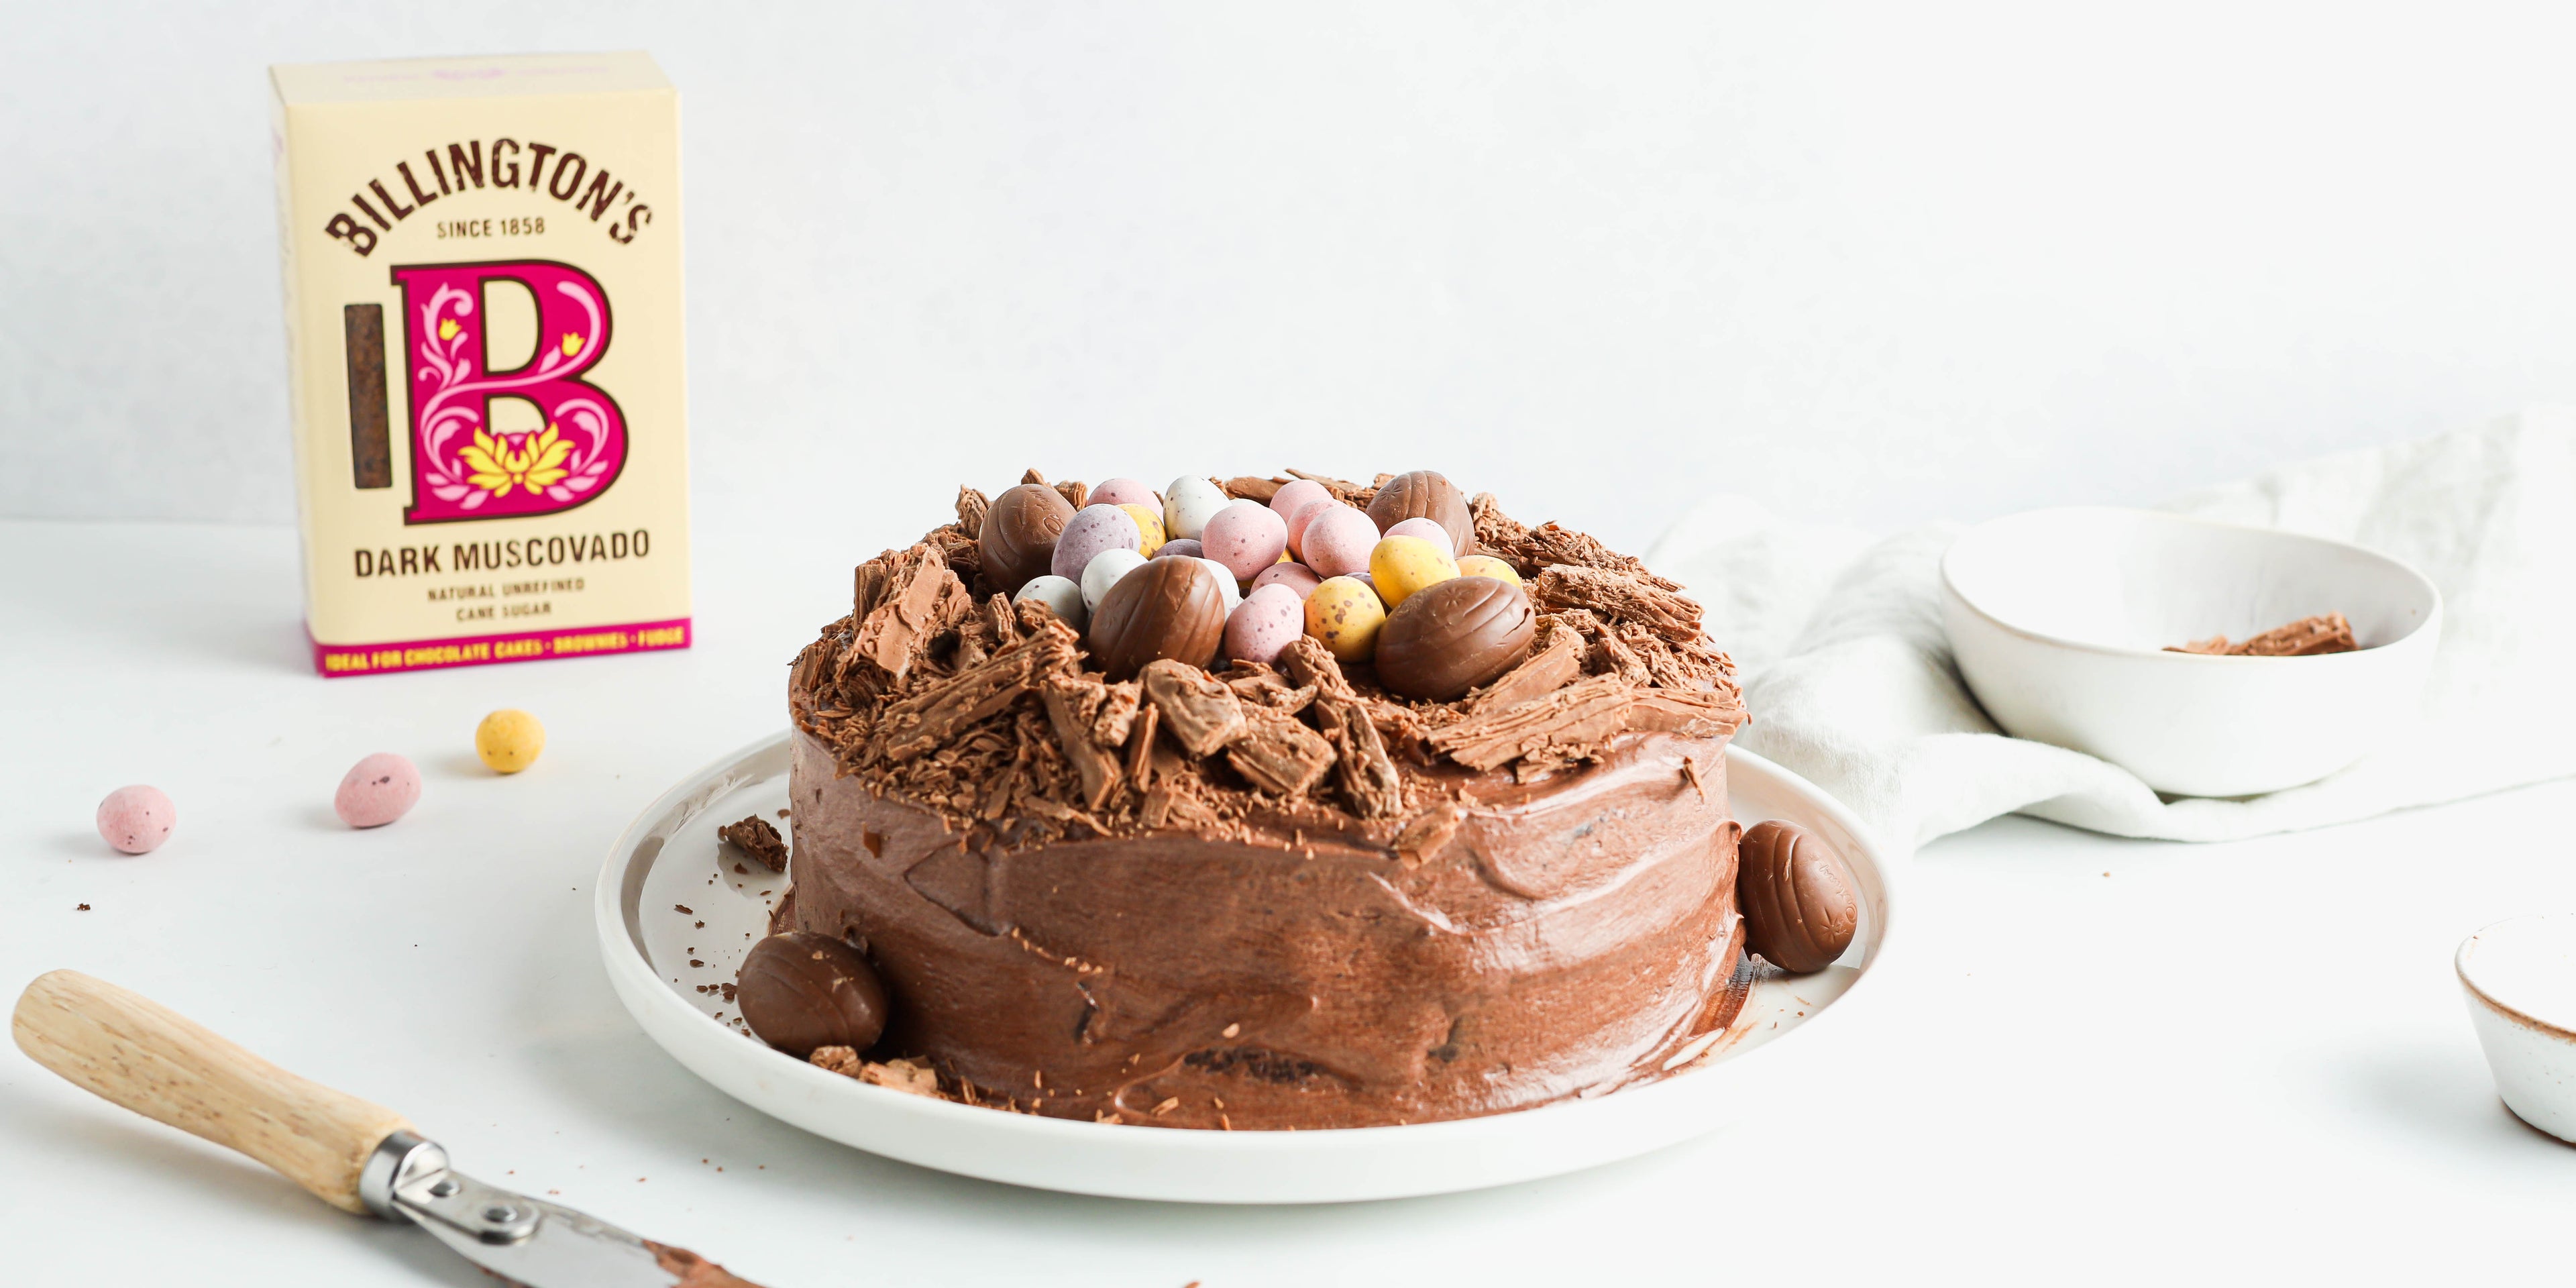 Finished Chocolate Nest Cake topped with easter eggs, and crushed flake, in front of a box of Billington's Dark Muscovado sugar